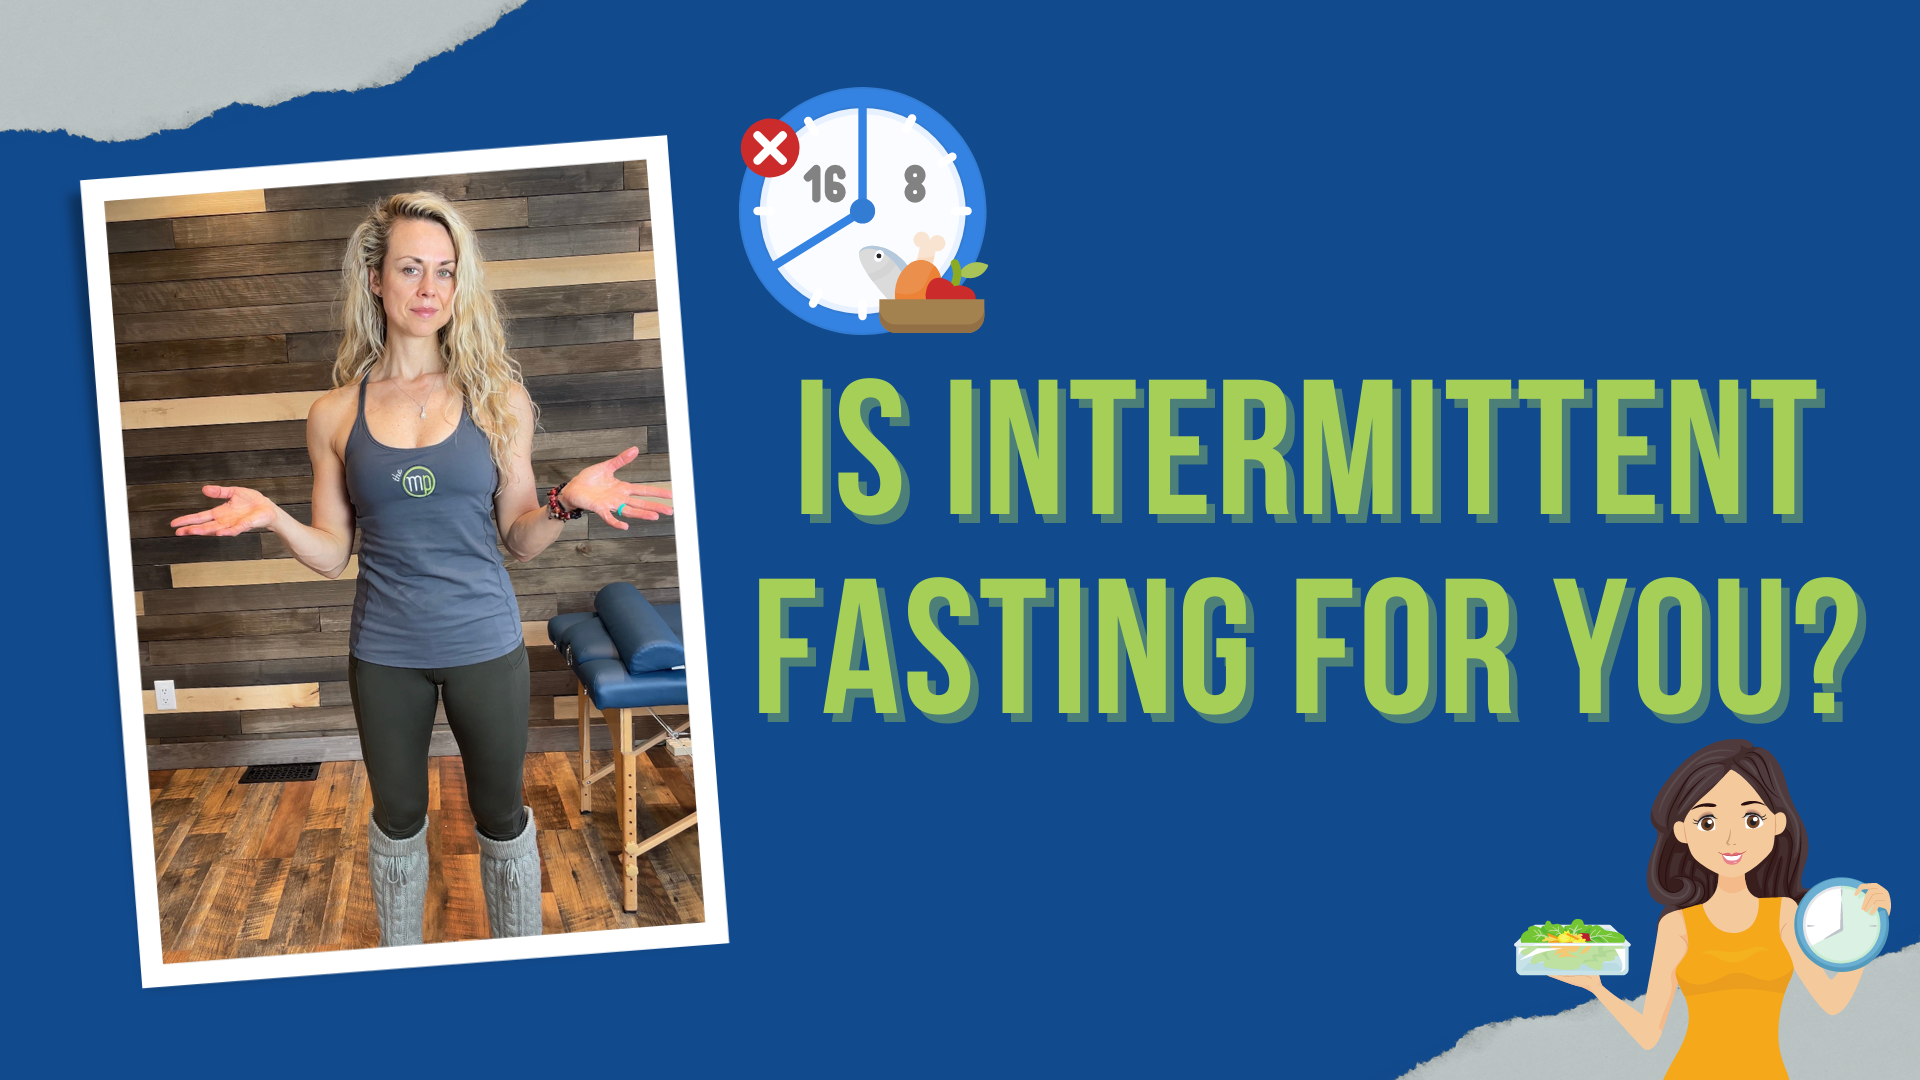 Is intermittent fasting for you?